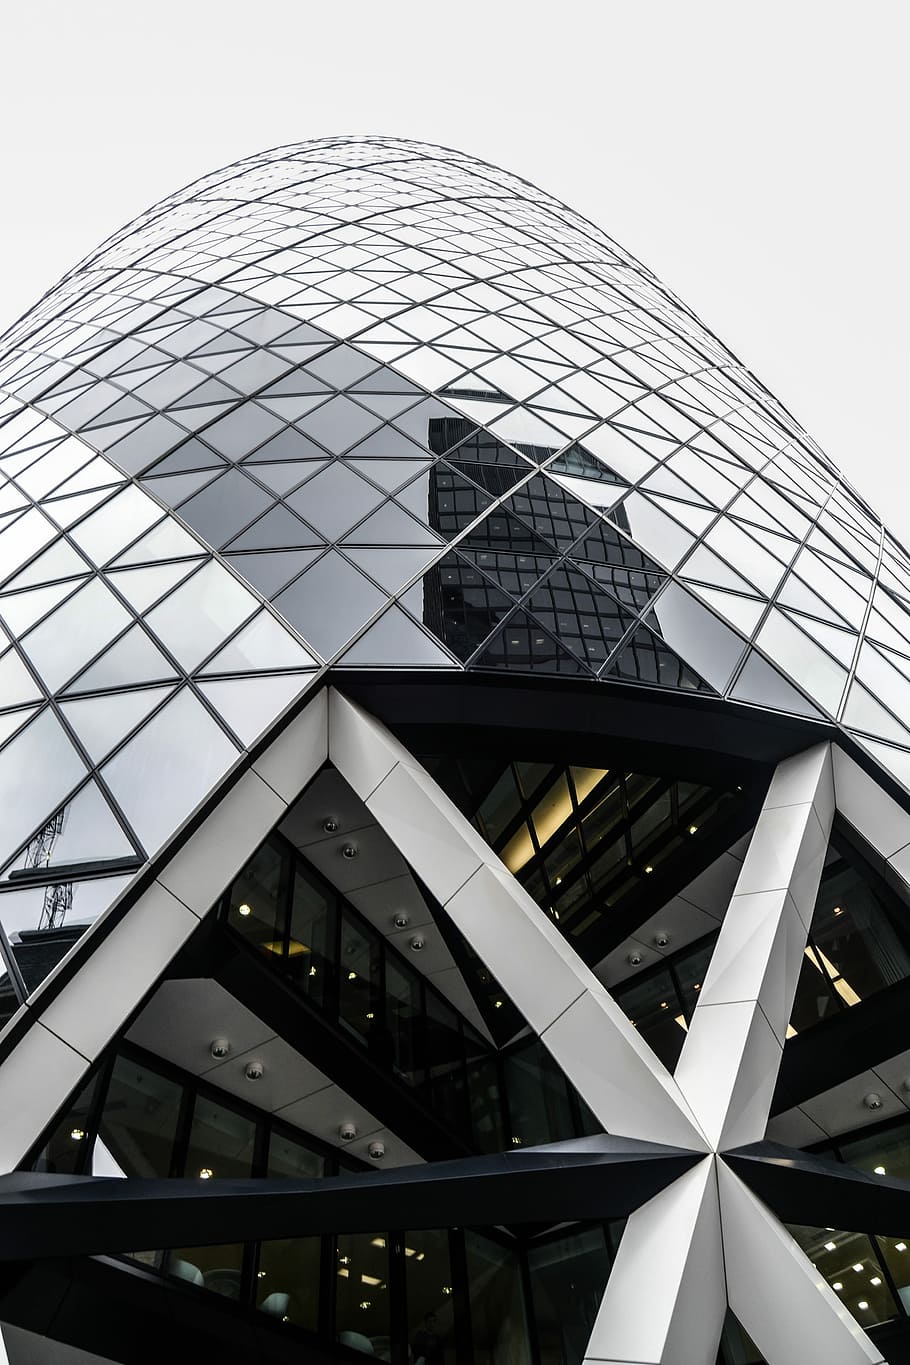 gherkin tower, london, london, city, england, architecture, great britain, united kingdom, building, bussines, modern